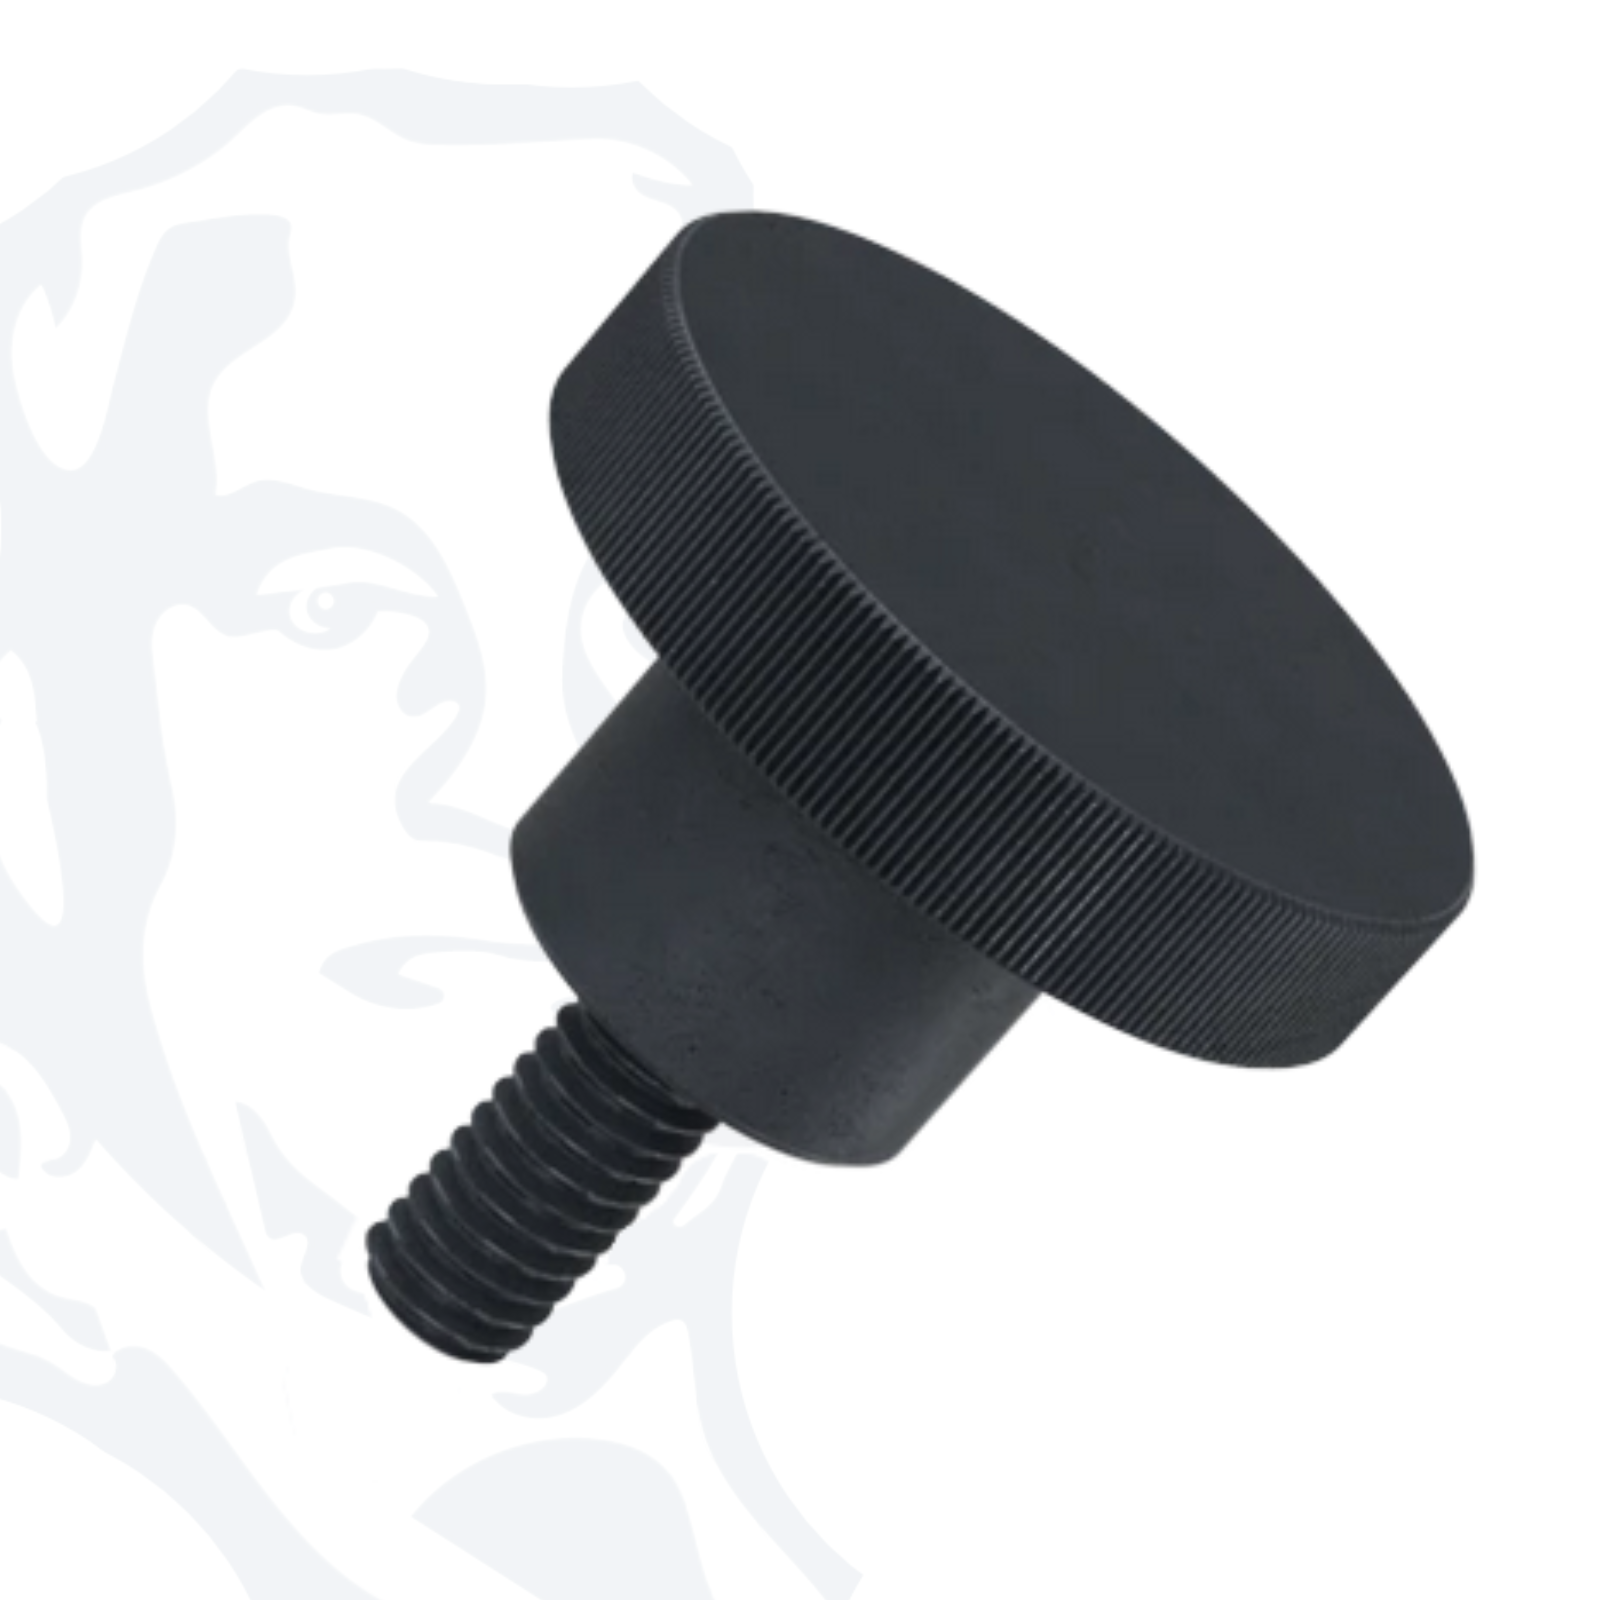 M5 Knurled High Thumb Screws (DIN 464) - Black Stainless Steel (A2)